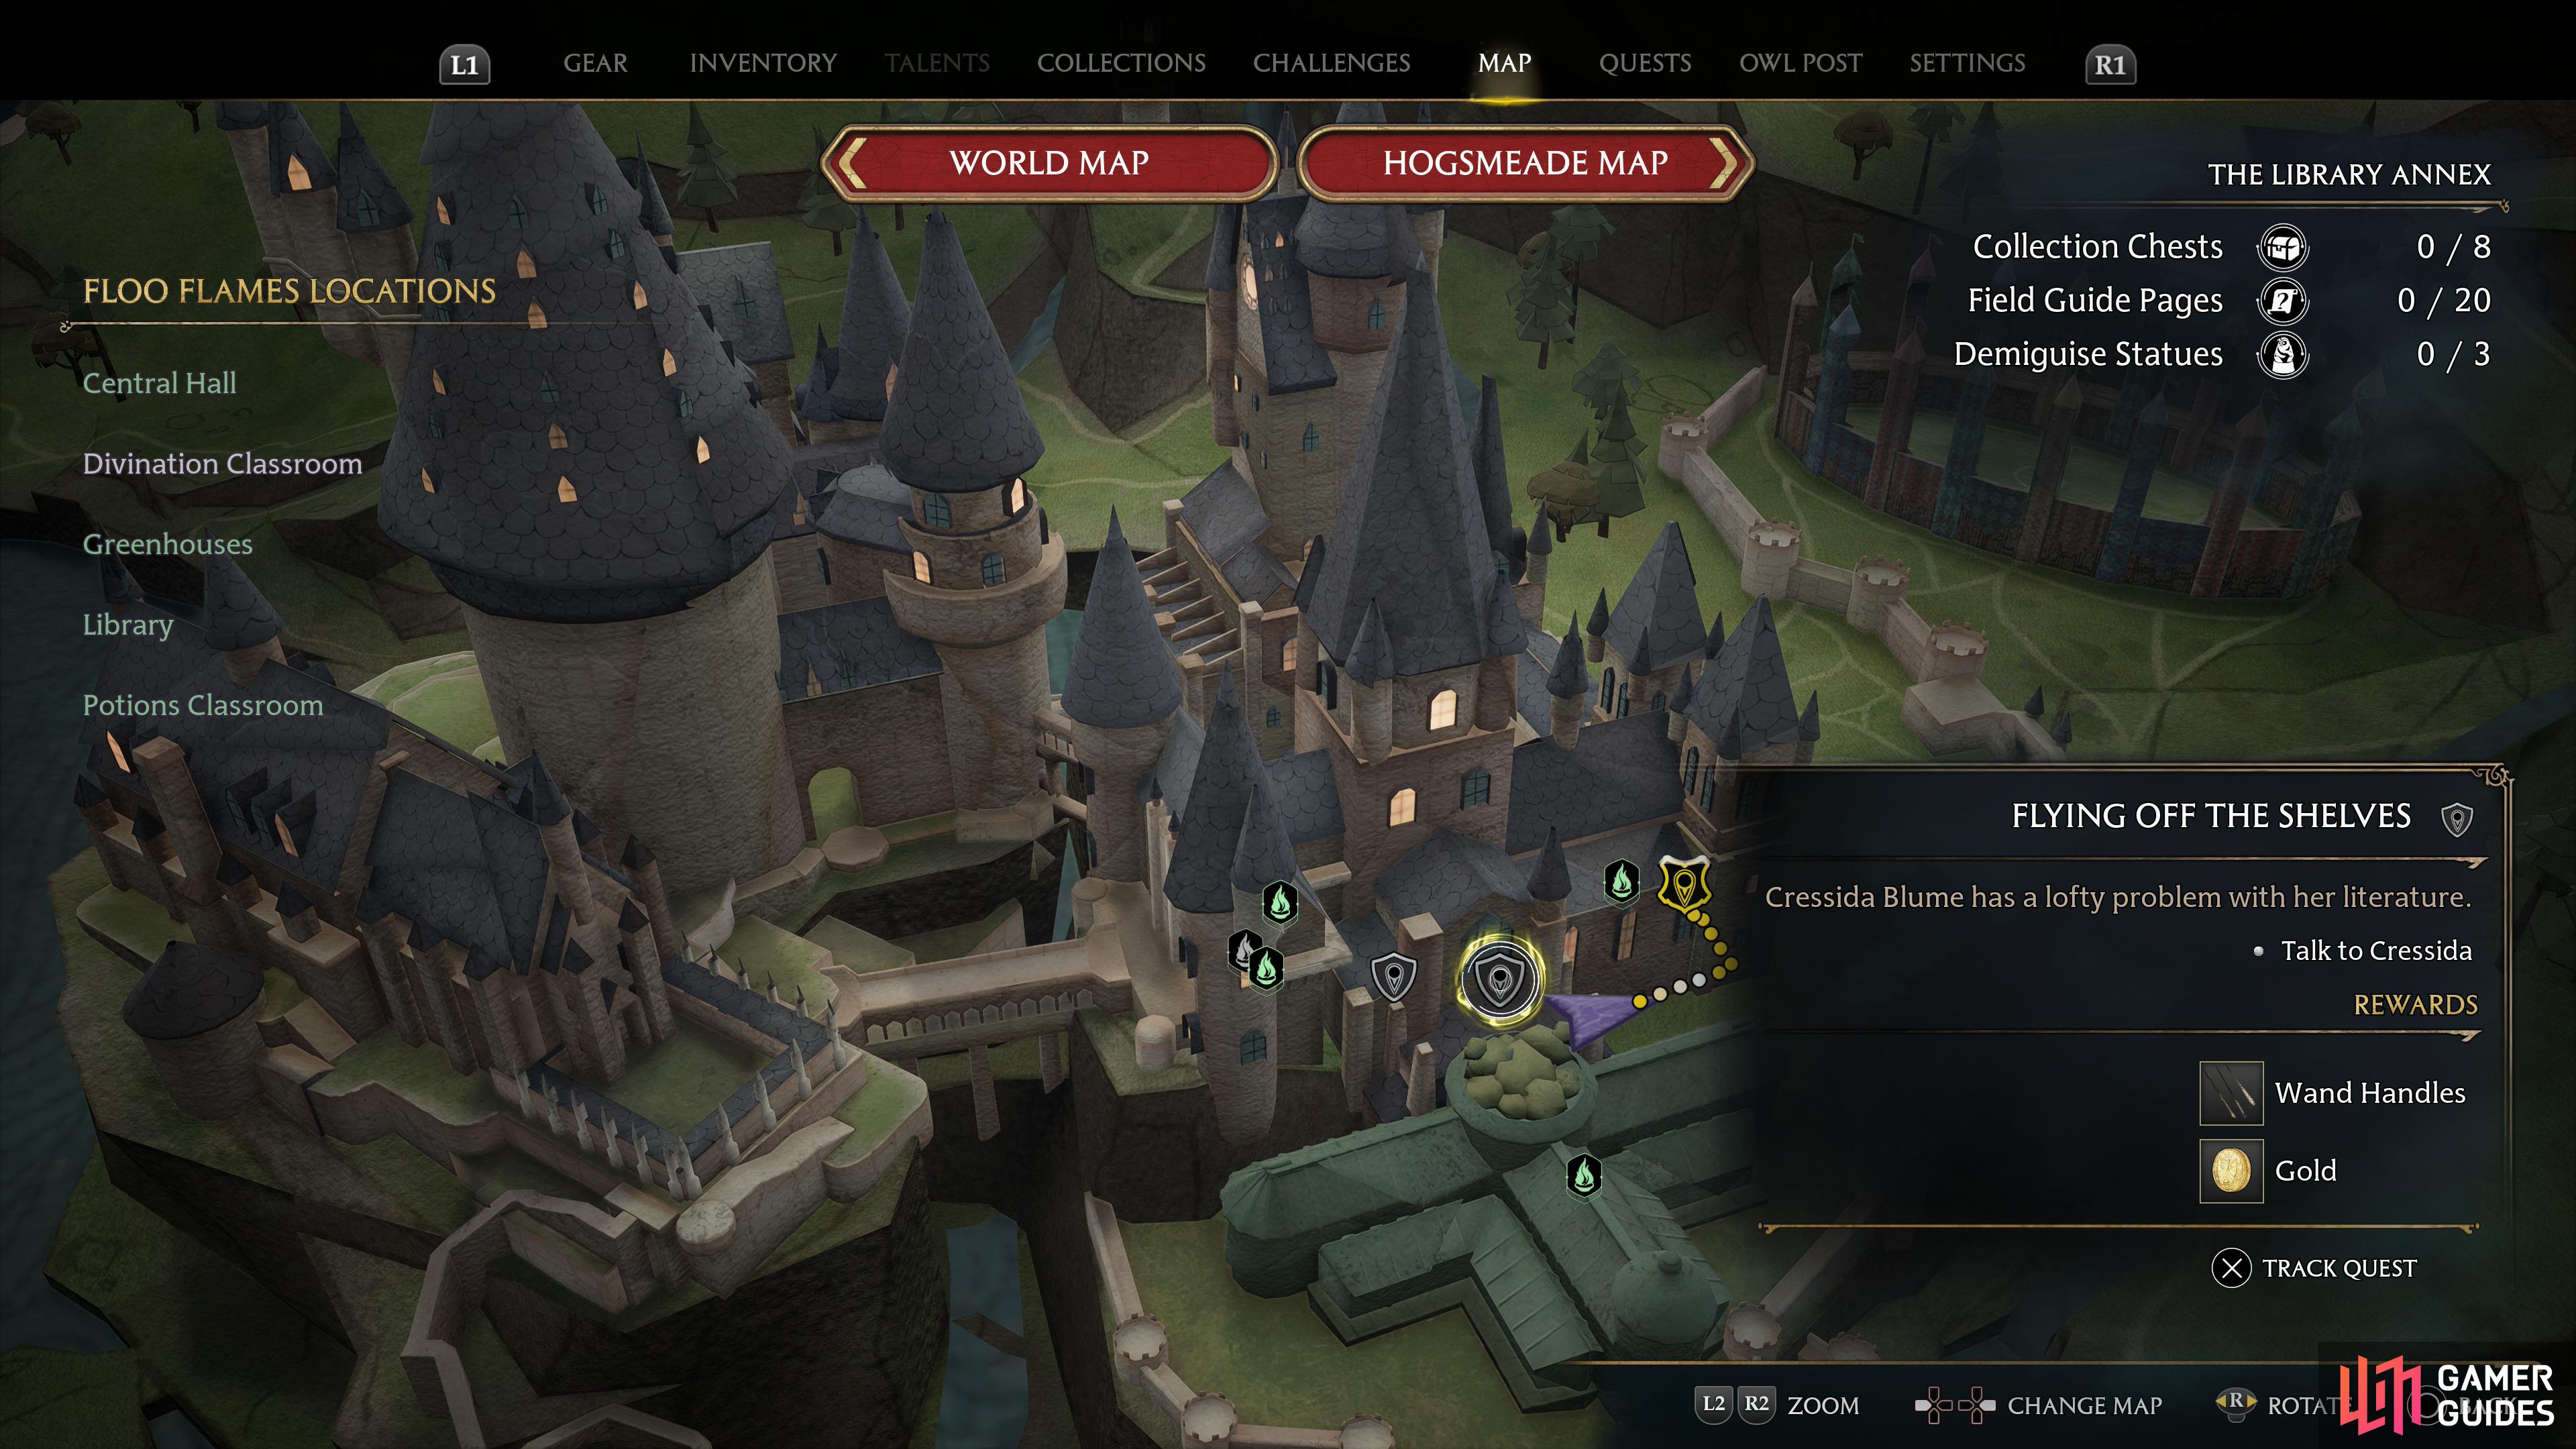 and click on them to reveal the trackable locations of side quest in that area.